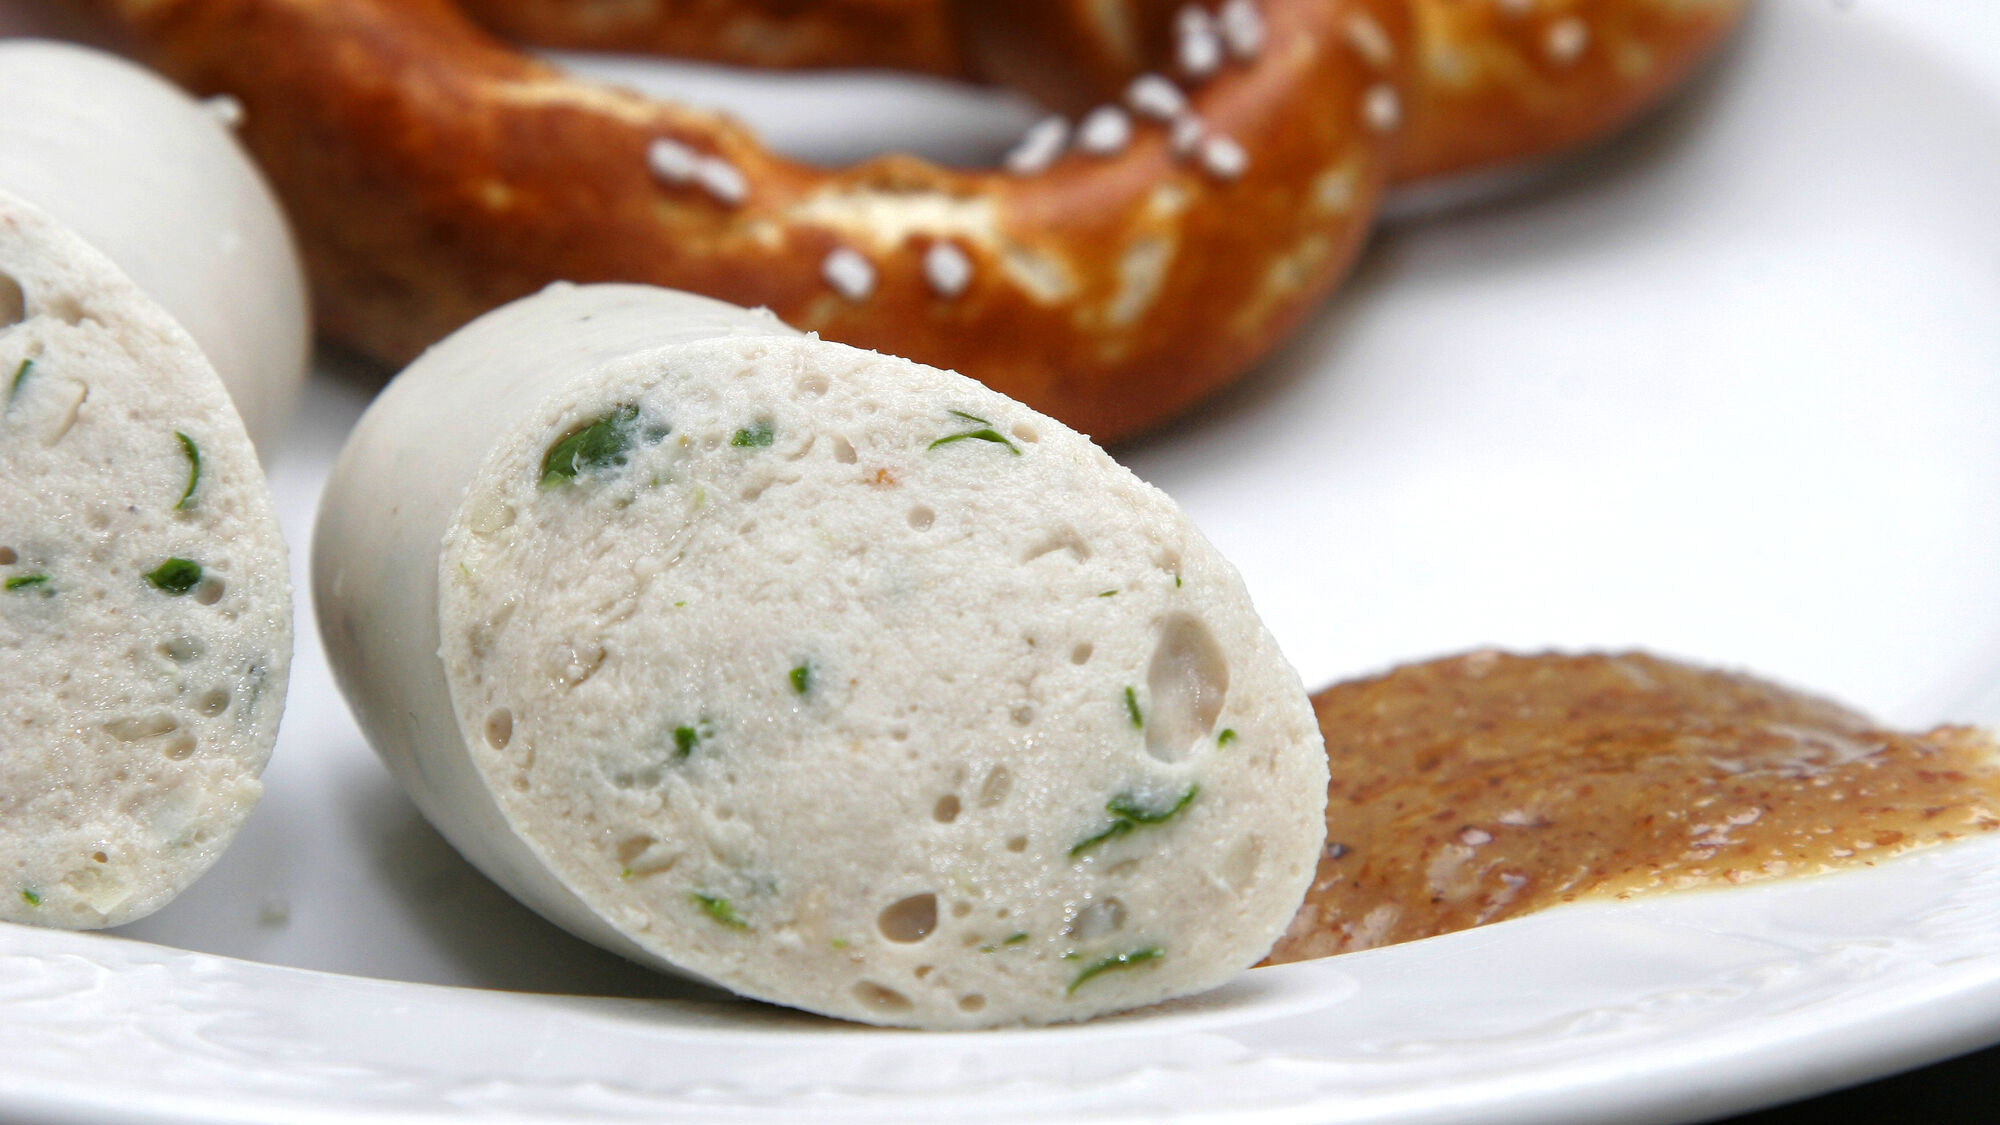 Weisswurst. /@ R. Hass